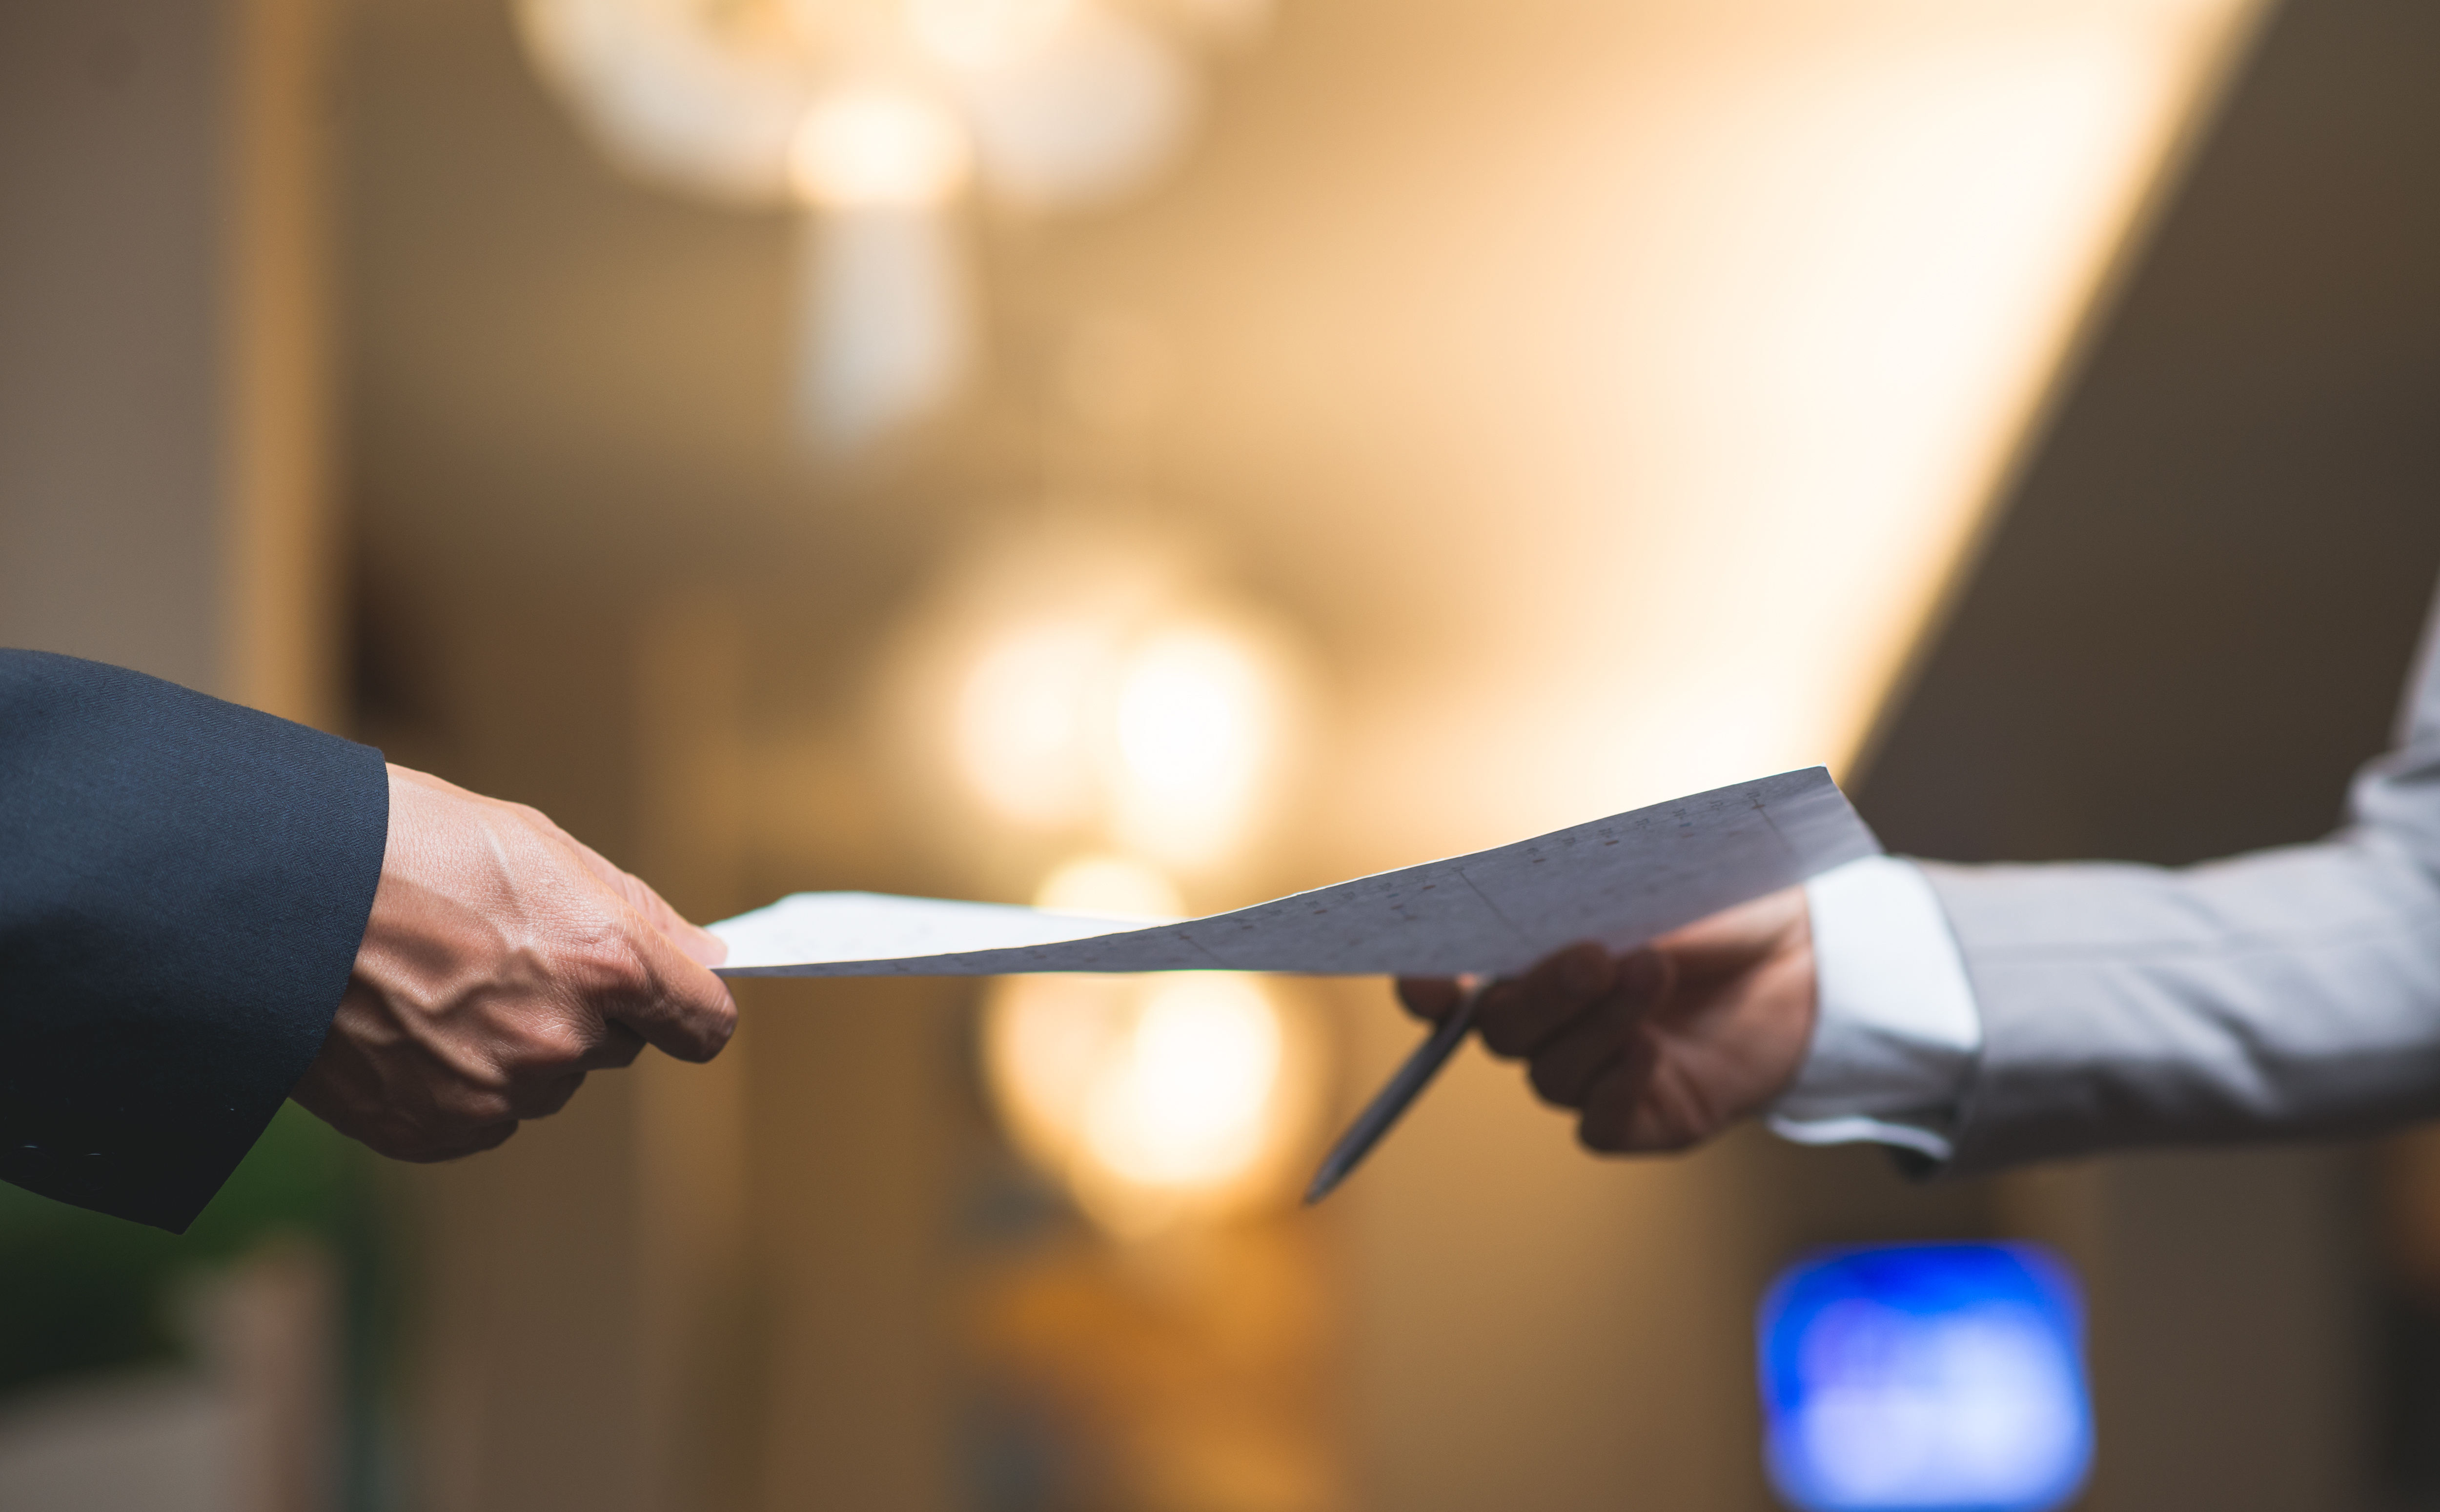 Hands of business people passing document | Source: Shutterstock